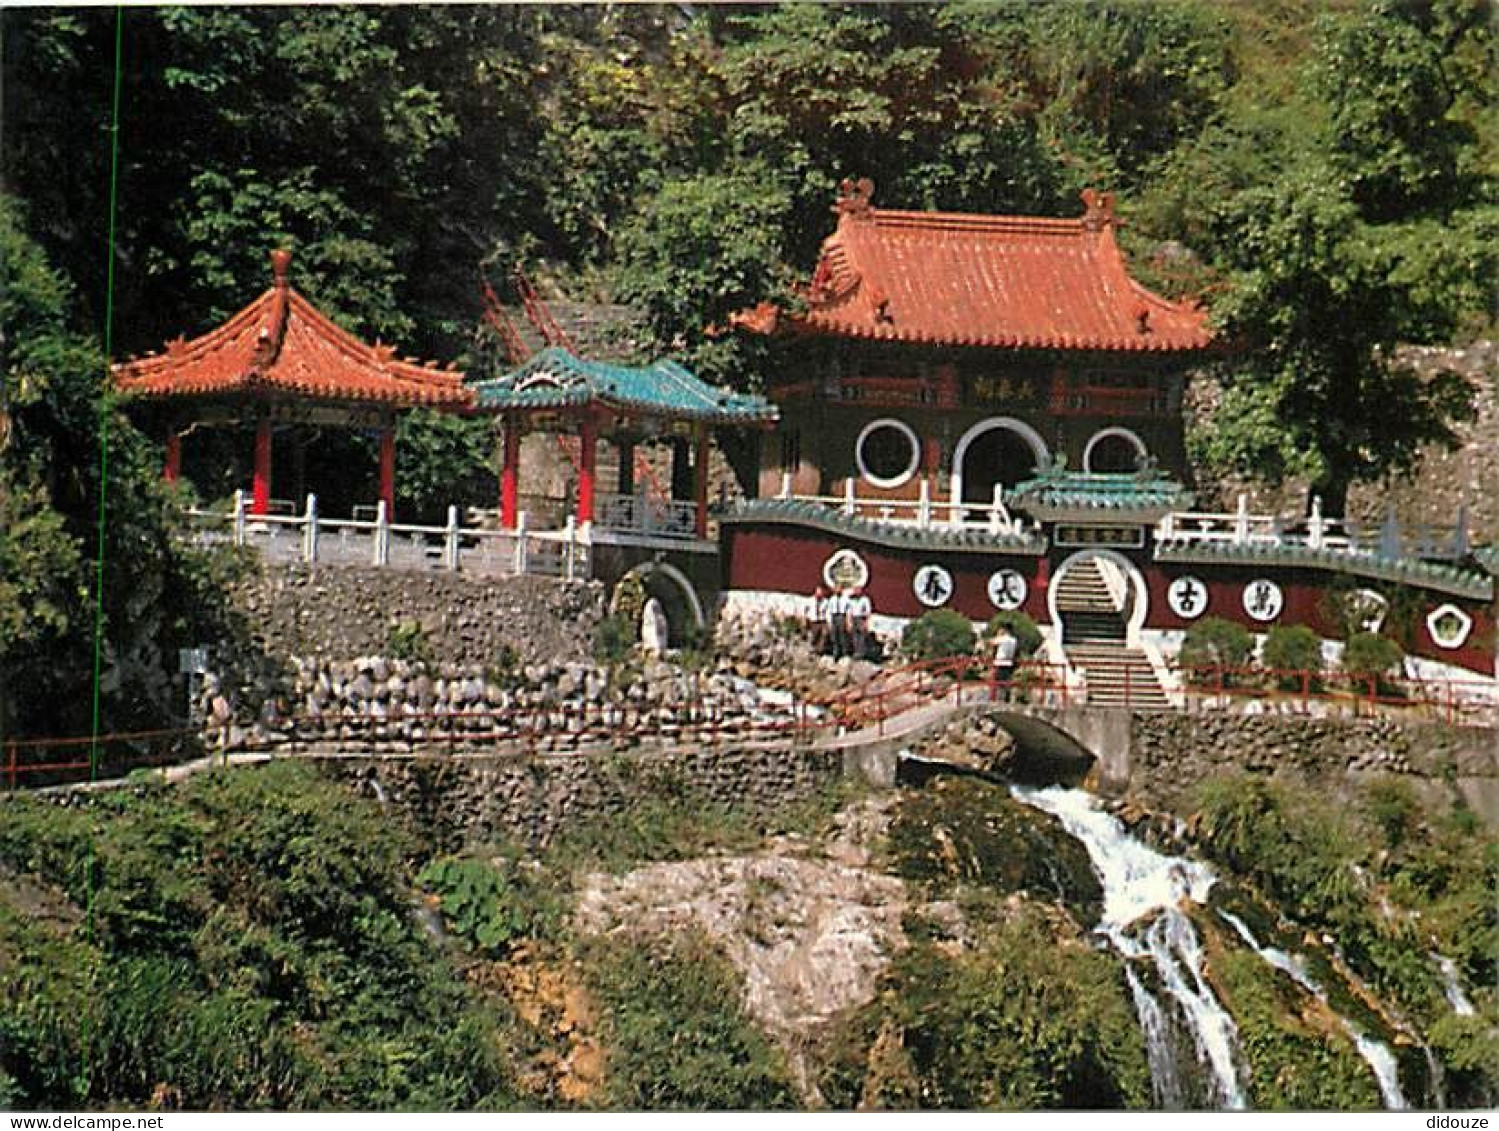 Taiwan - The Shrine Of Eternal Spring Is One Of The Numerous Wonders In The 1.2-mile Taroko Gorge That Comprises The Eas - Taiwan